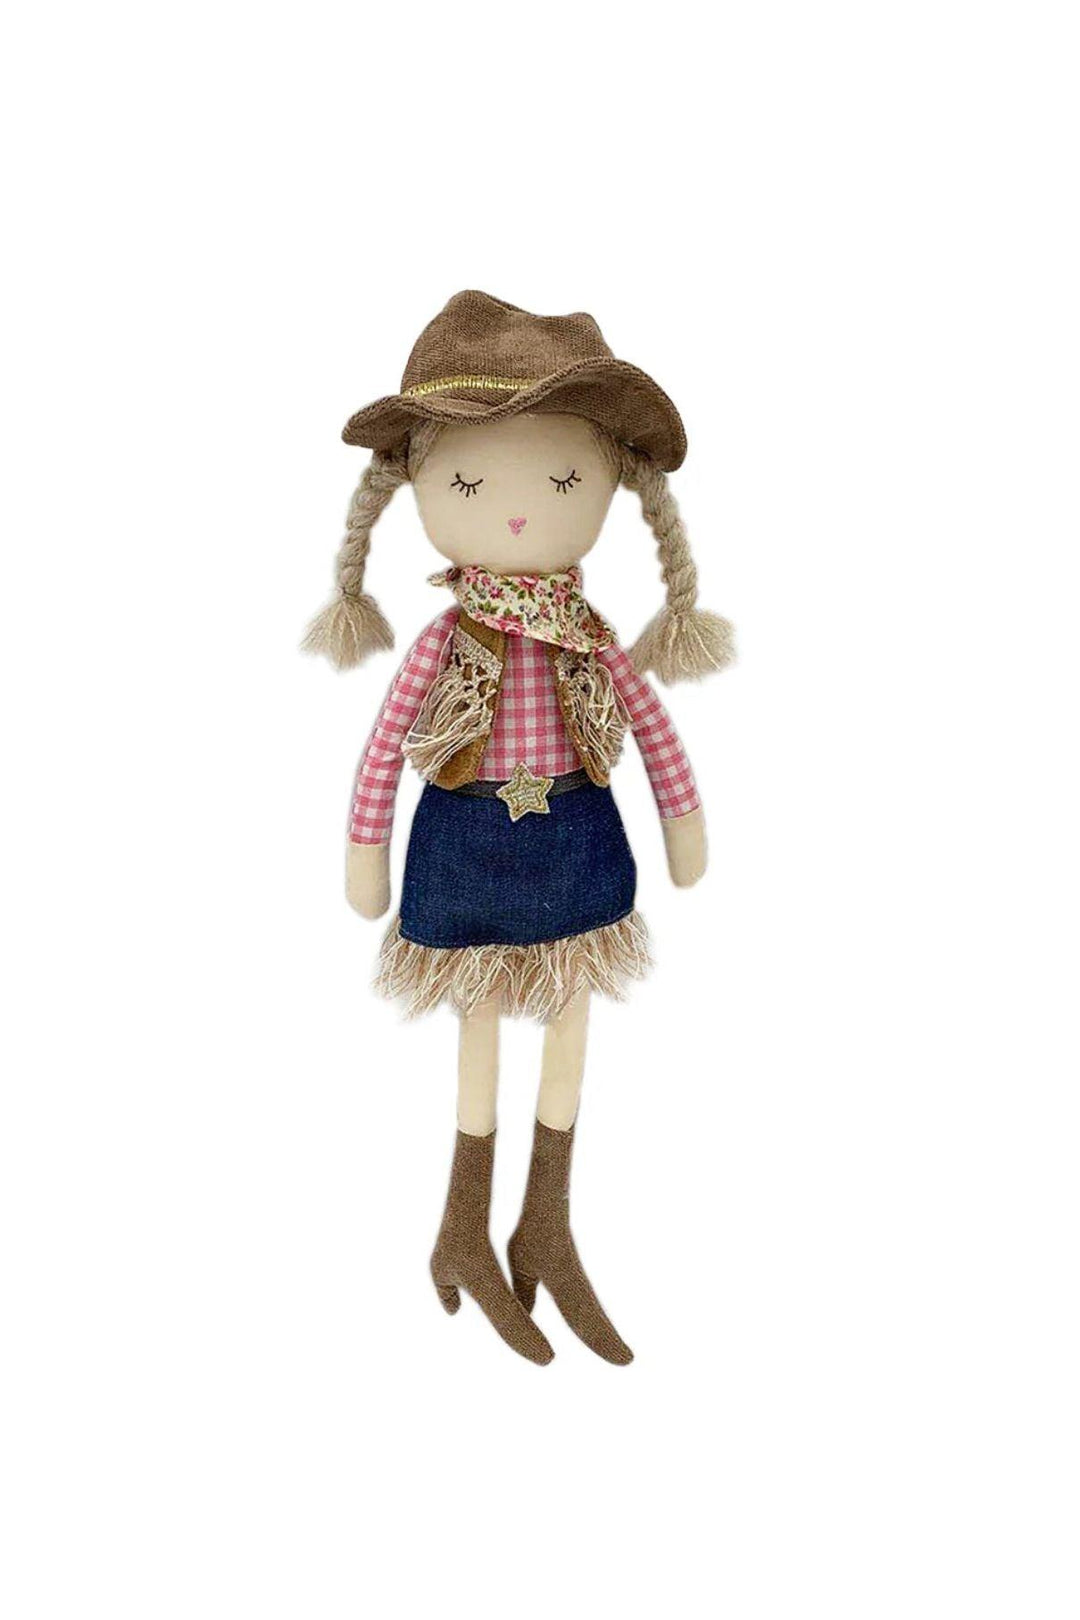 Meet Clementine The Cowgirl Doll - Your New Best Friend - Sophia Rose Children's Boutique